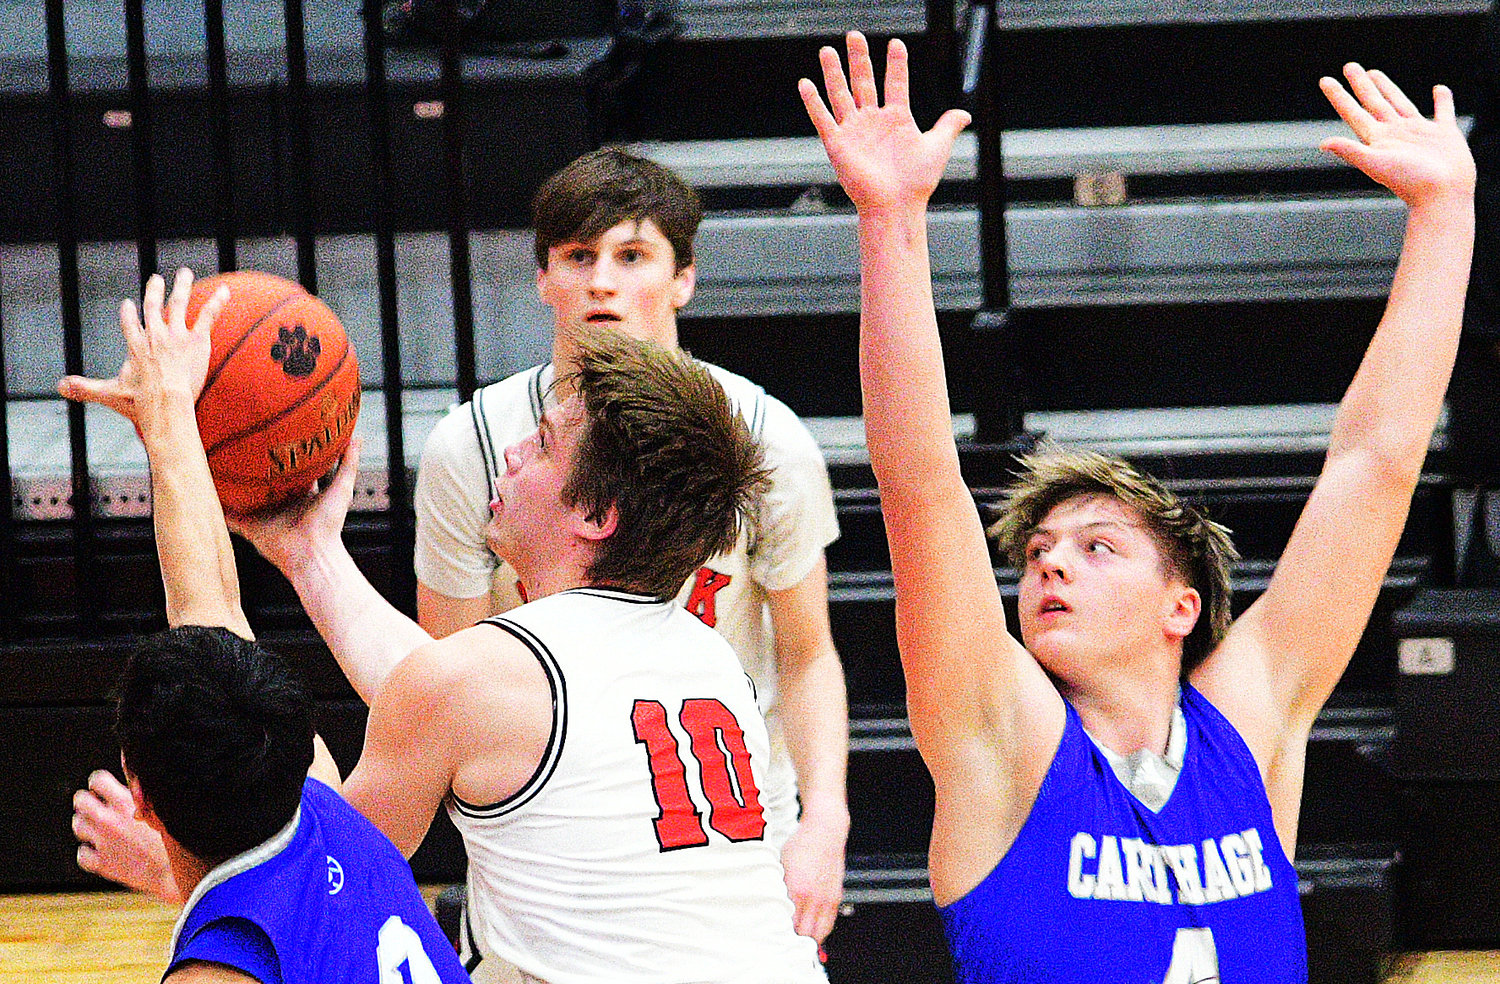 TYLER HARMON shoots in between two Carthage players.